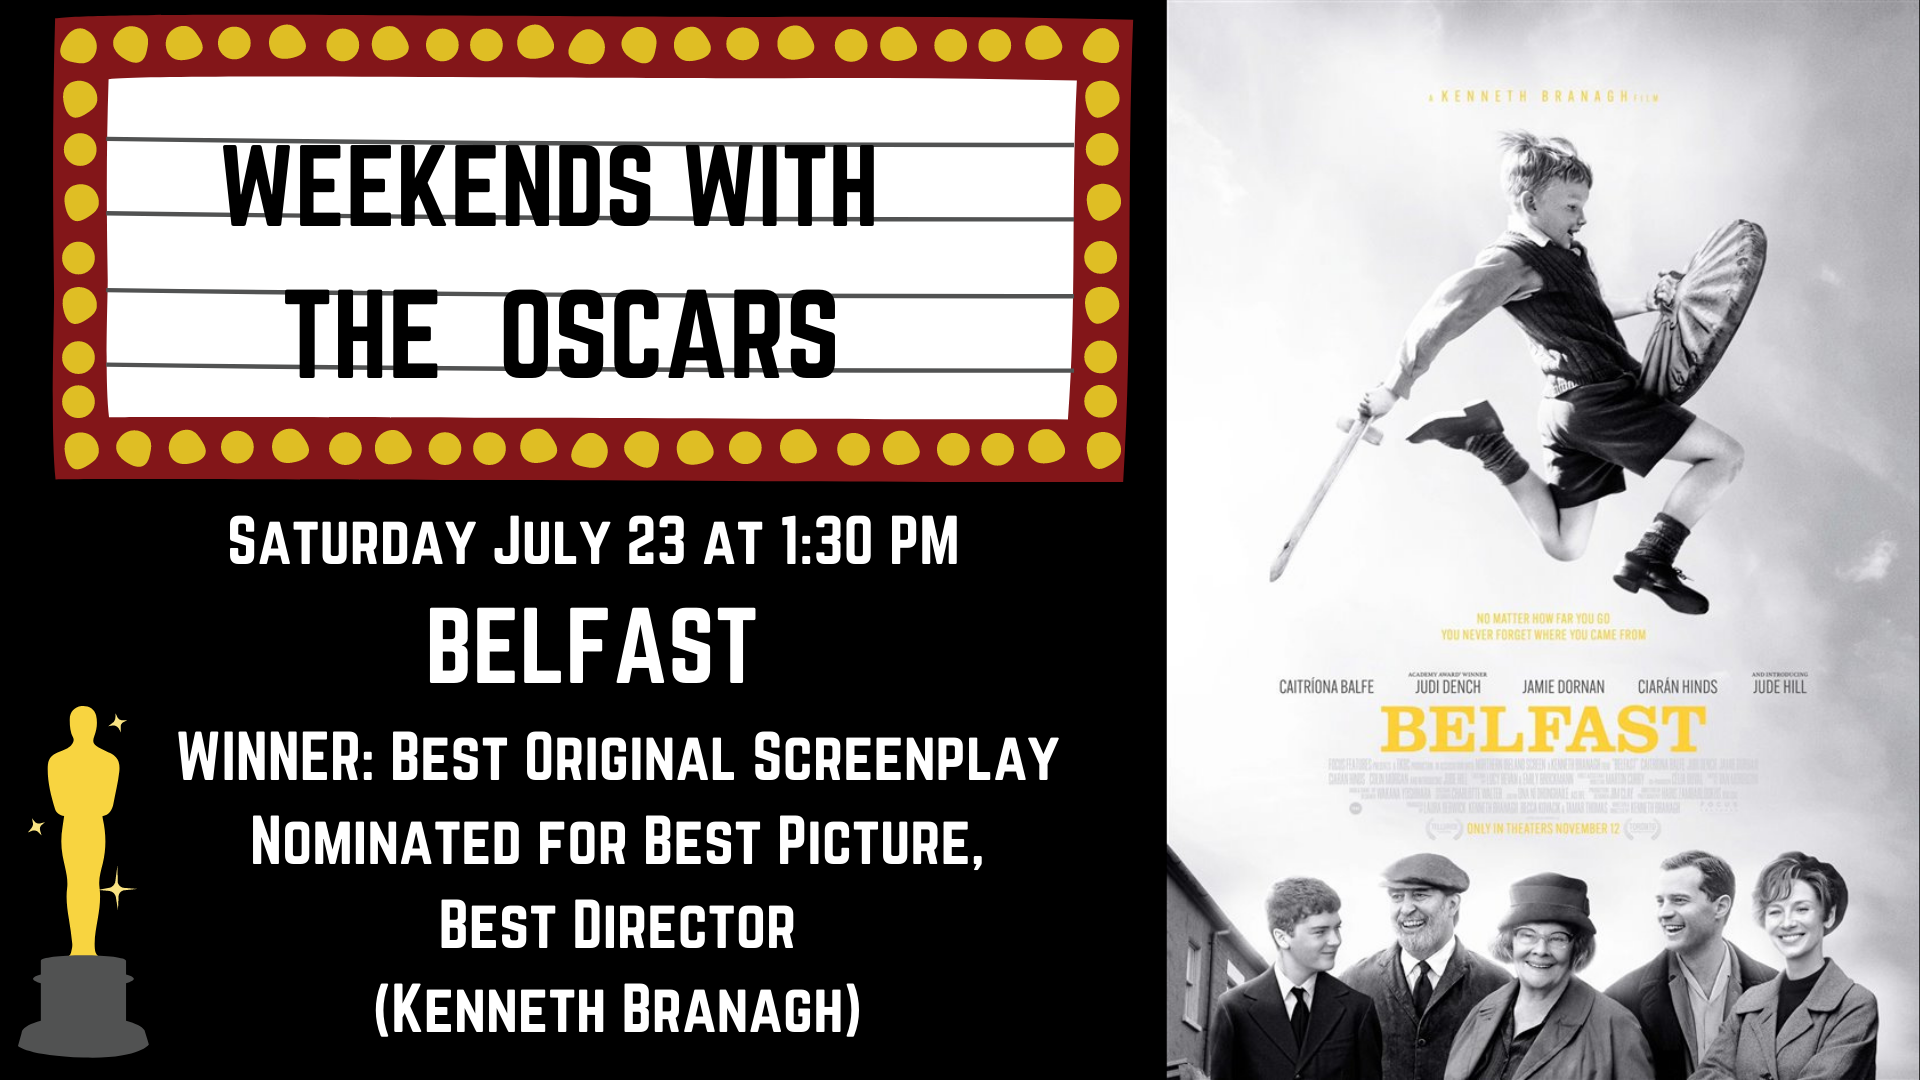 Banner advertising our screening of BELFAST on July 23 at 1:30 PM, featuring the movie poster.